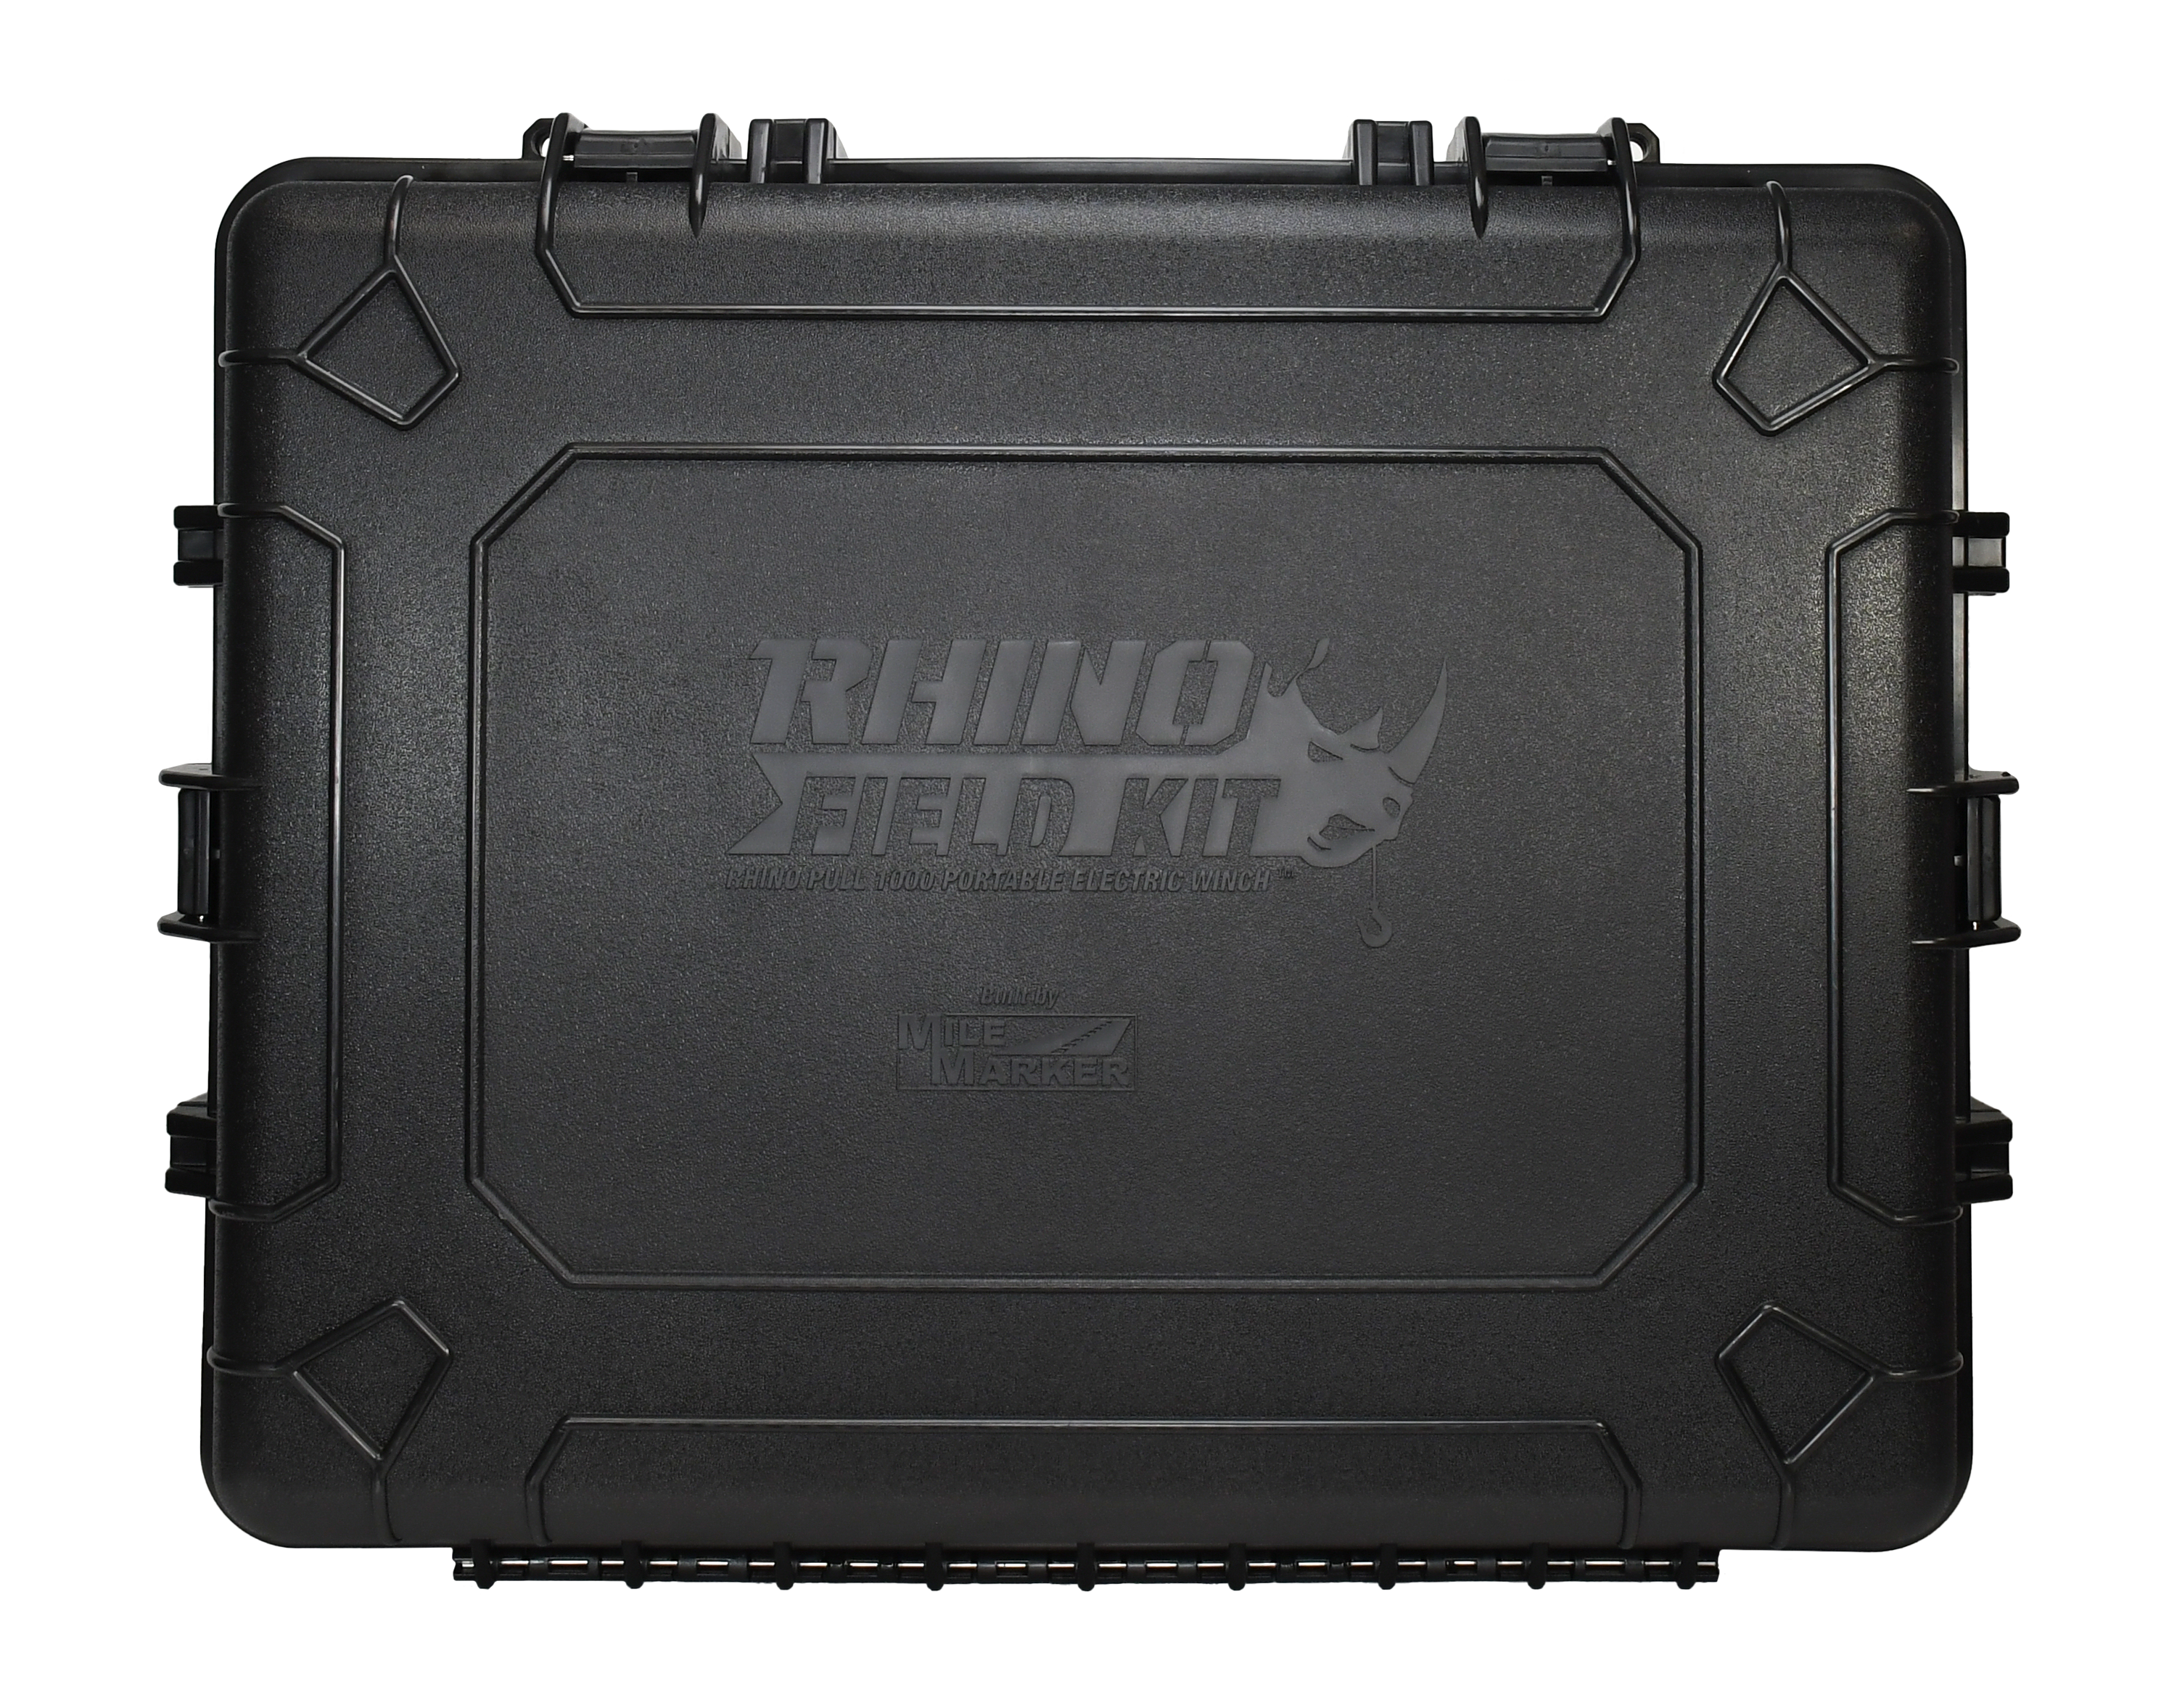 Image of the exterior of the Rhino Field Kit hard shell carrying case